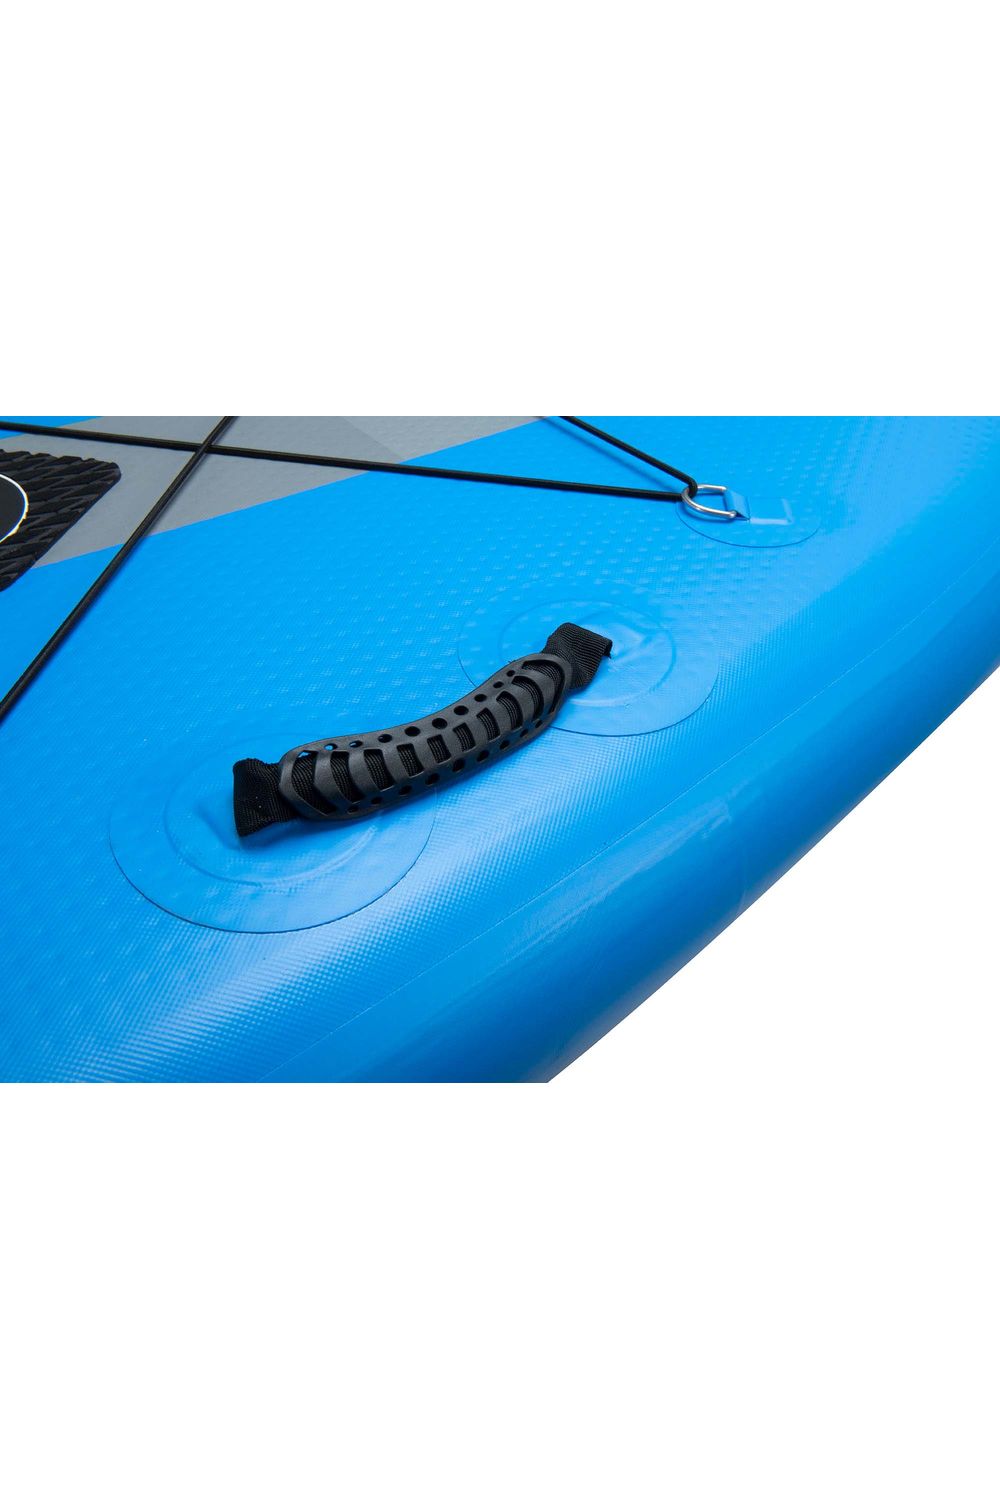 Tiki 10'6 Glider Sup Inflatable Pack + Accessories Pack with Paddle